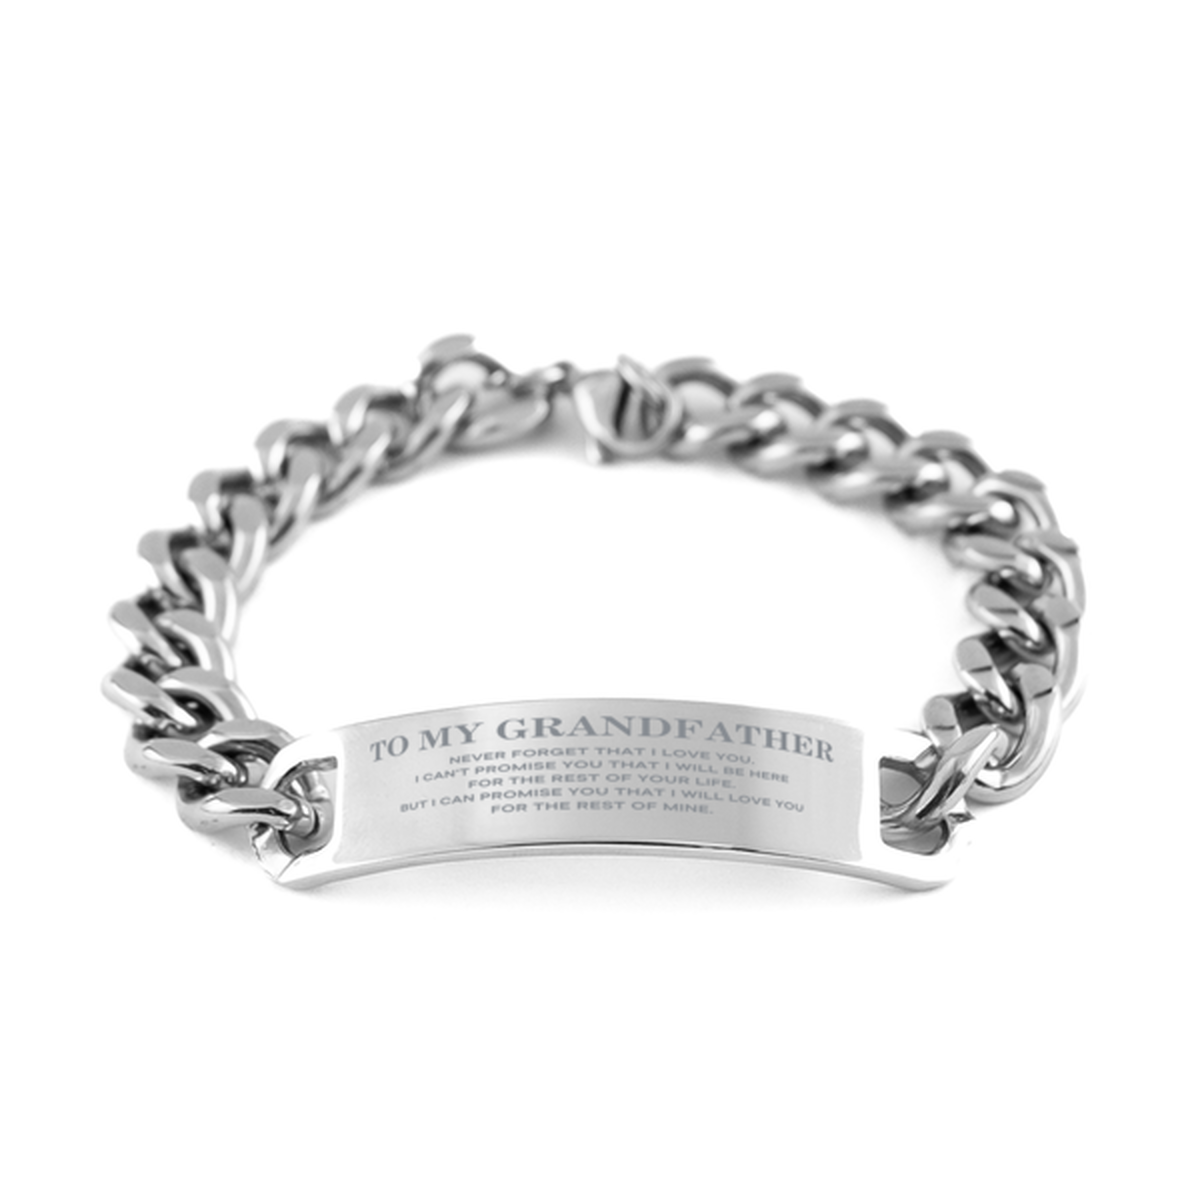 To My Grandfather Gifts, I will love you for the rest of mine, Love Grandfather Bracelet, Birthday Christmas Unique Cuban Chain Stainless Steel Bracelet For Grandfather